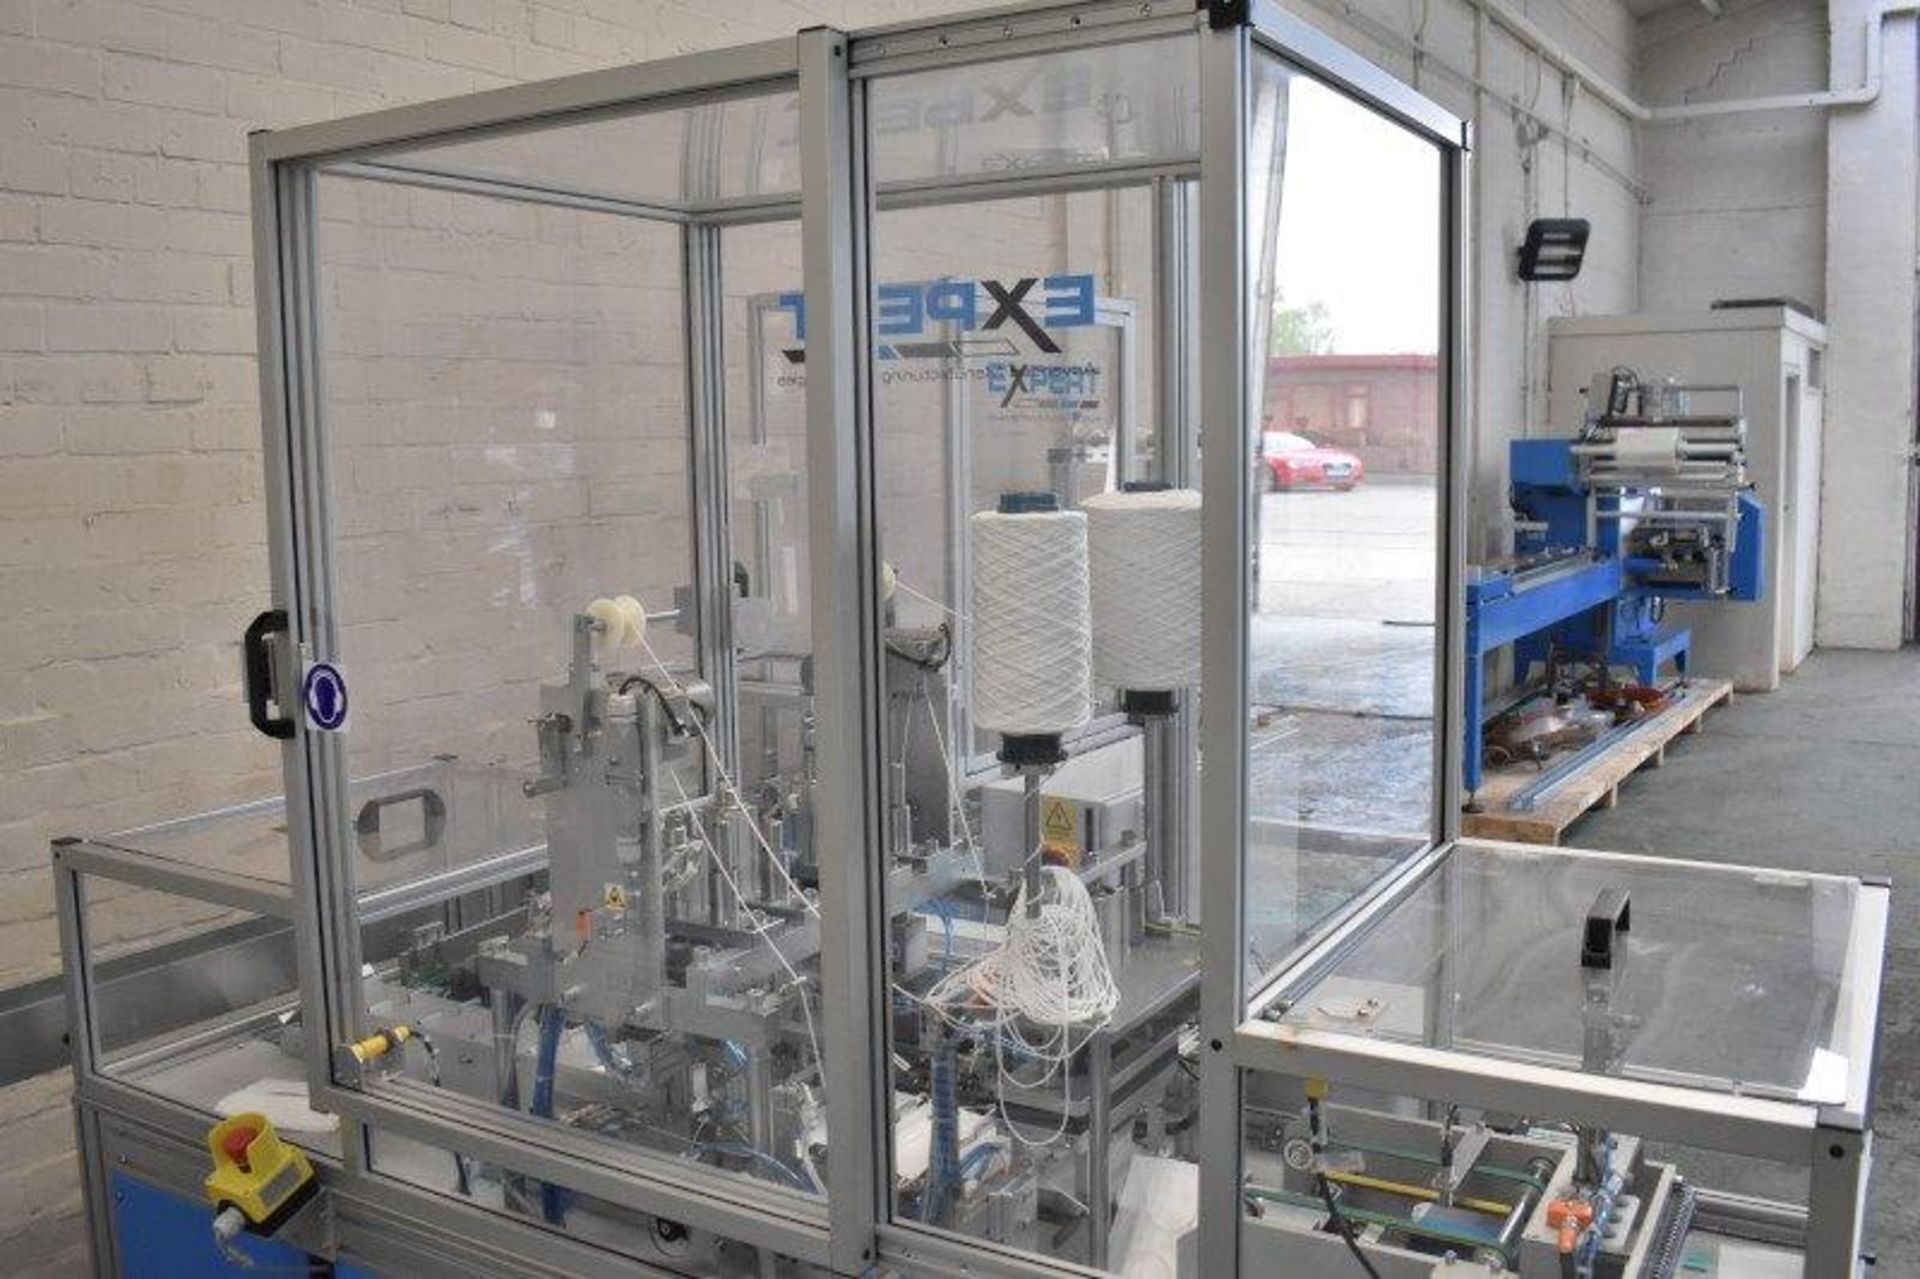 Expert fully automated Mask Making Machine including an Ilapak Smart flow wrapping packaging machine - Image 11 of 28